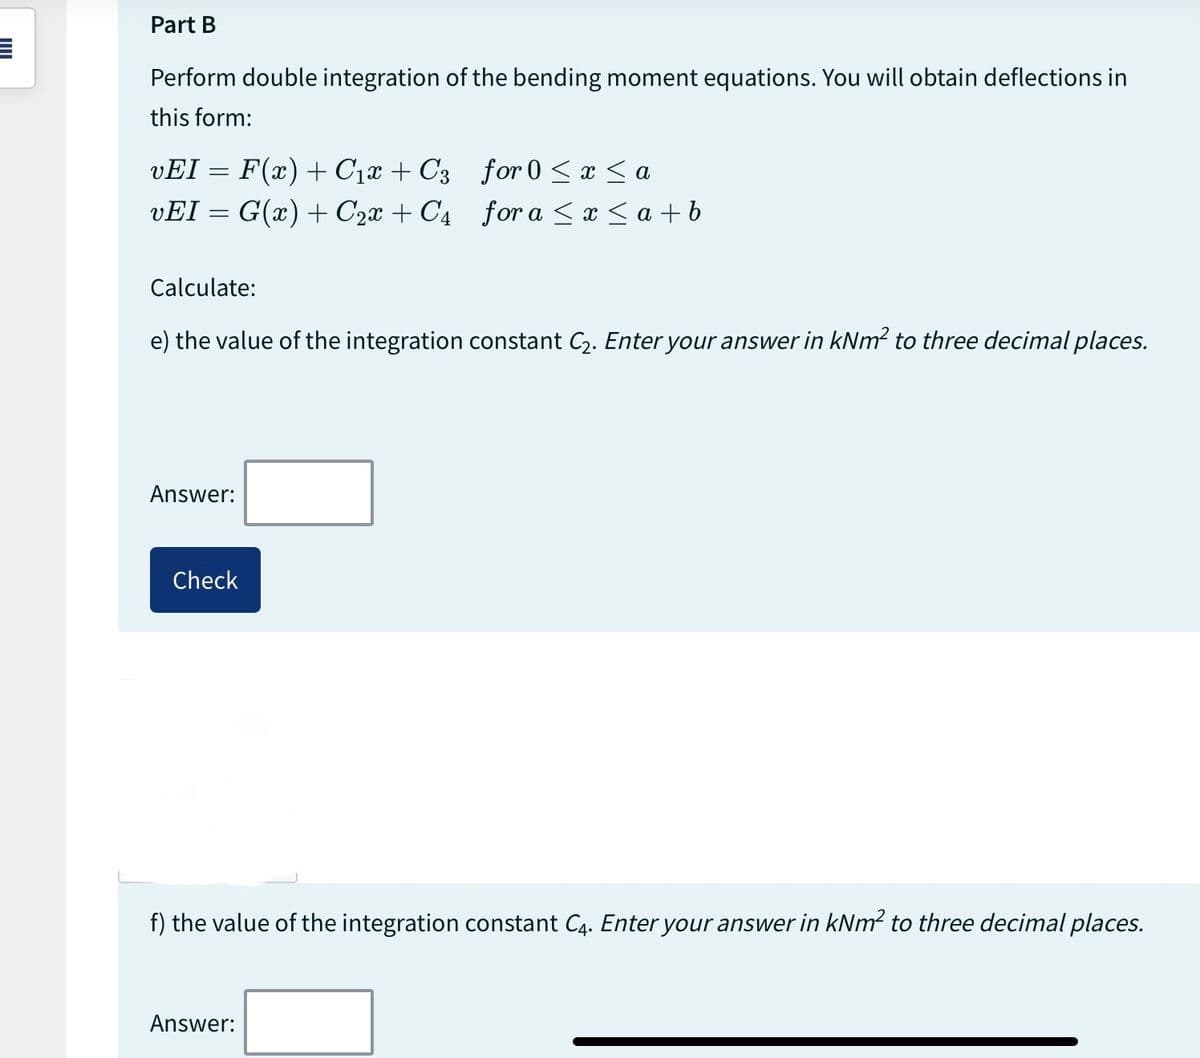 Part B
Perform double integration of the bending moment equations. You will obtain deflections in
this form:
vEI = F(x) + C₁x + C3
vEI = G(x) + C₂x + C4
Calculate:
e) the value of the integration constant C₂. Enter your answer in kNm² to three decimal places.
Answer:
Check
for 0 ≤ x ≤ a
for a ≤ x ≤ a+b
f) the value of the integration constant C4. Enter your answer in kNm² to three decimal places.
Answer: